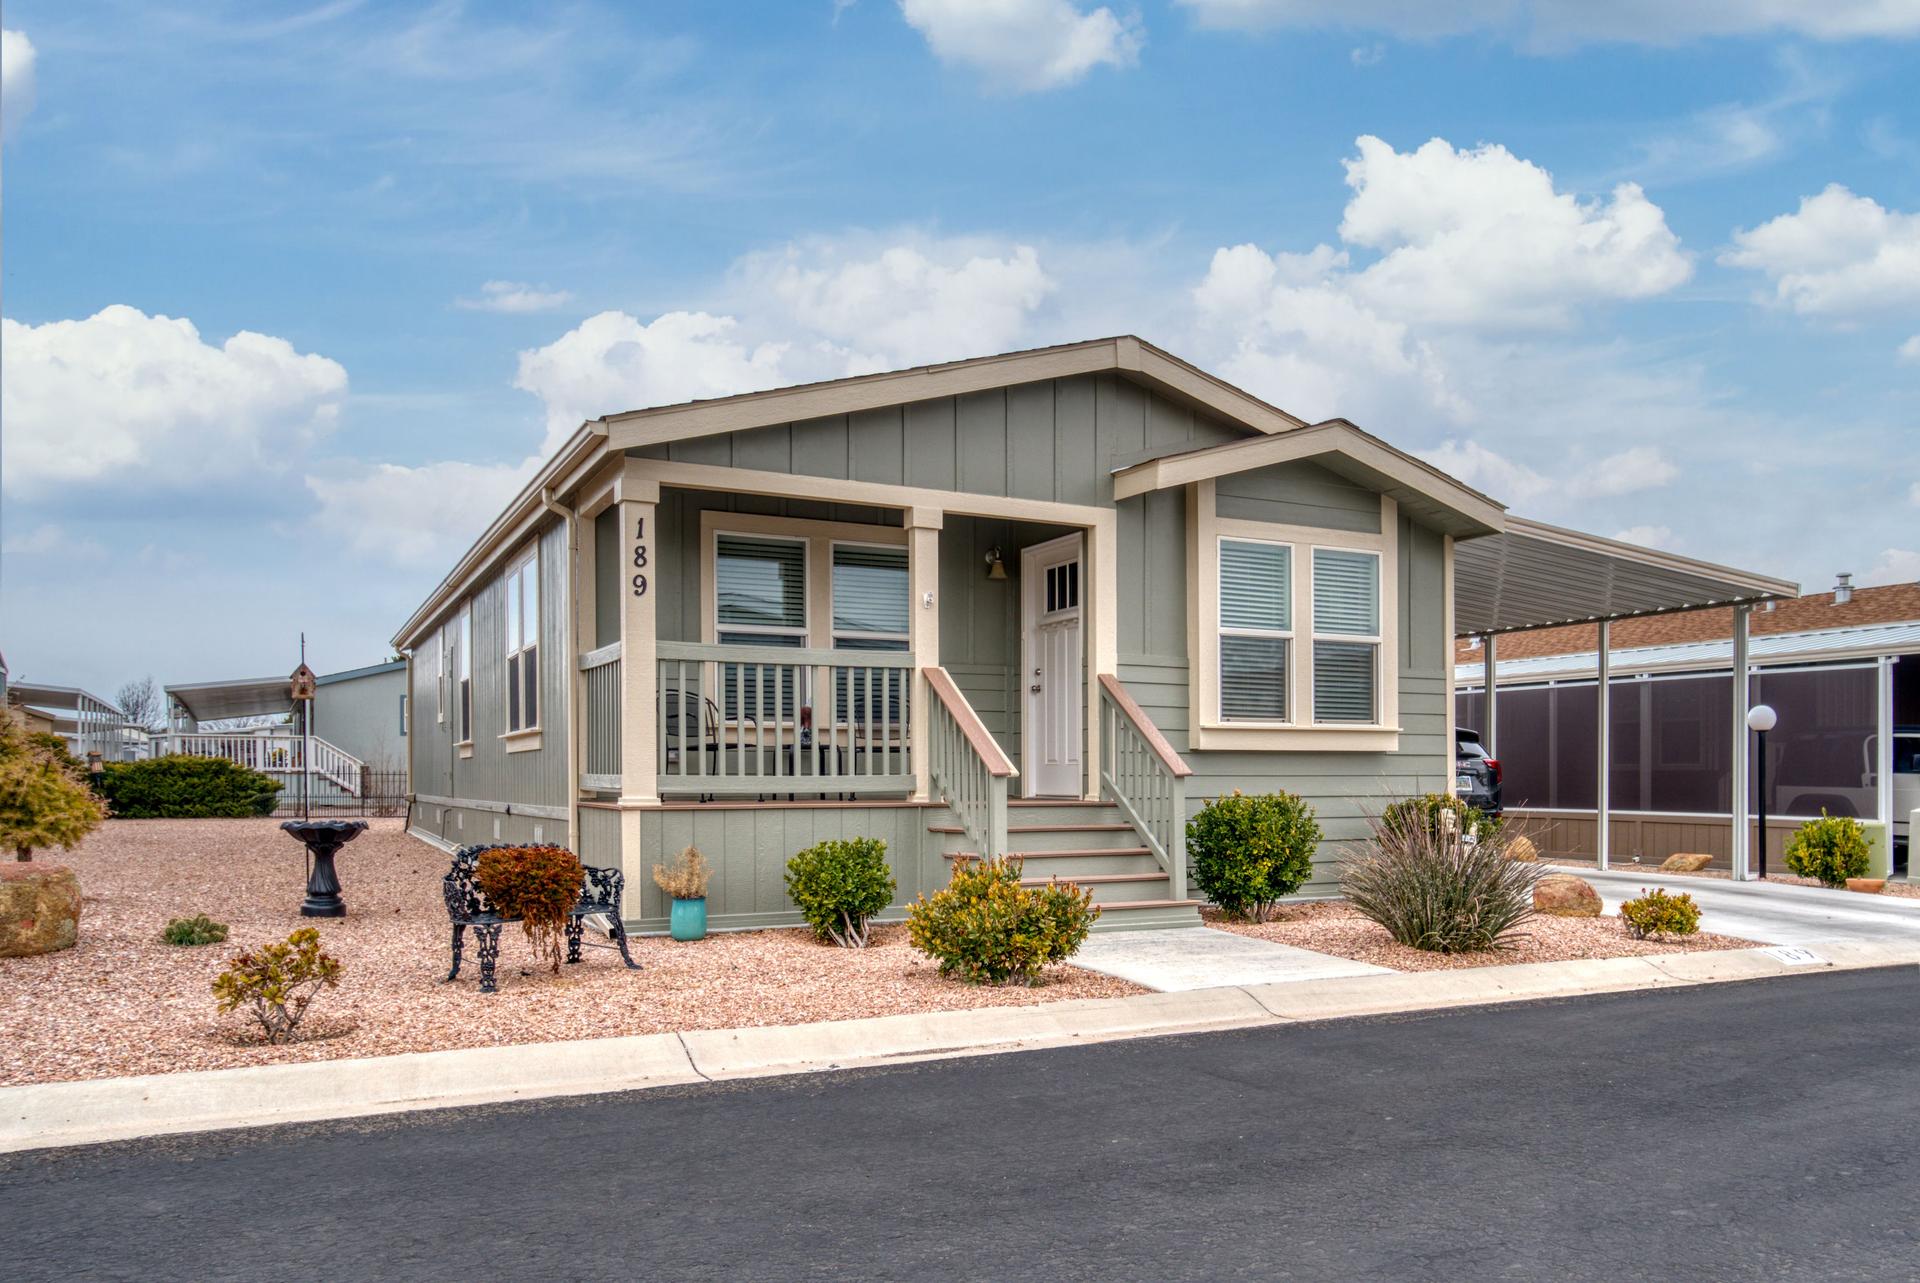 Manufactured Home with a porch and a driveway